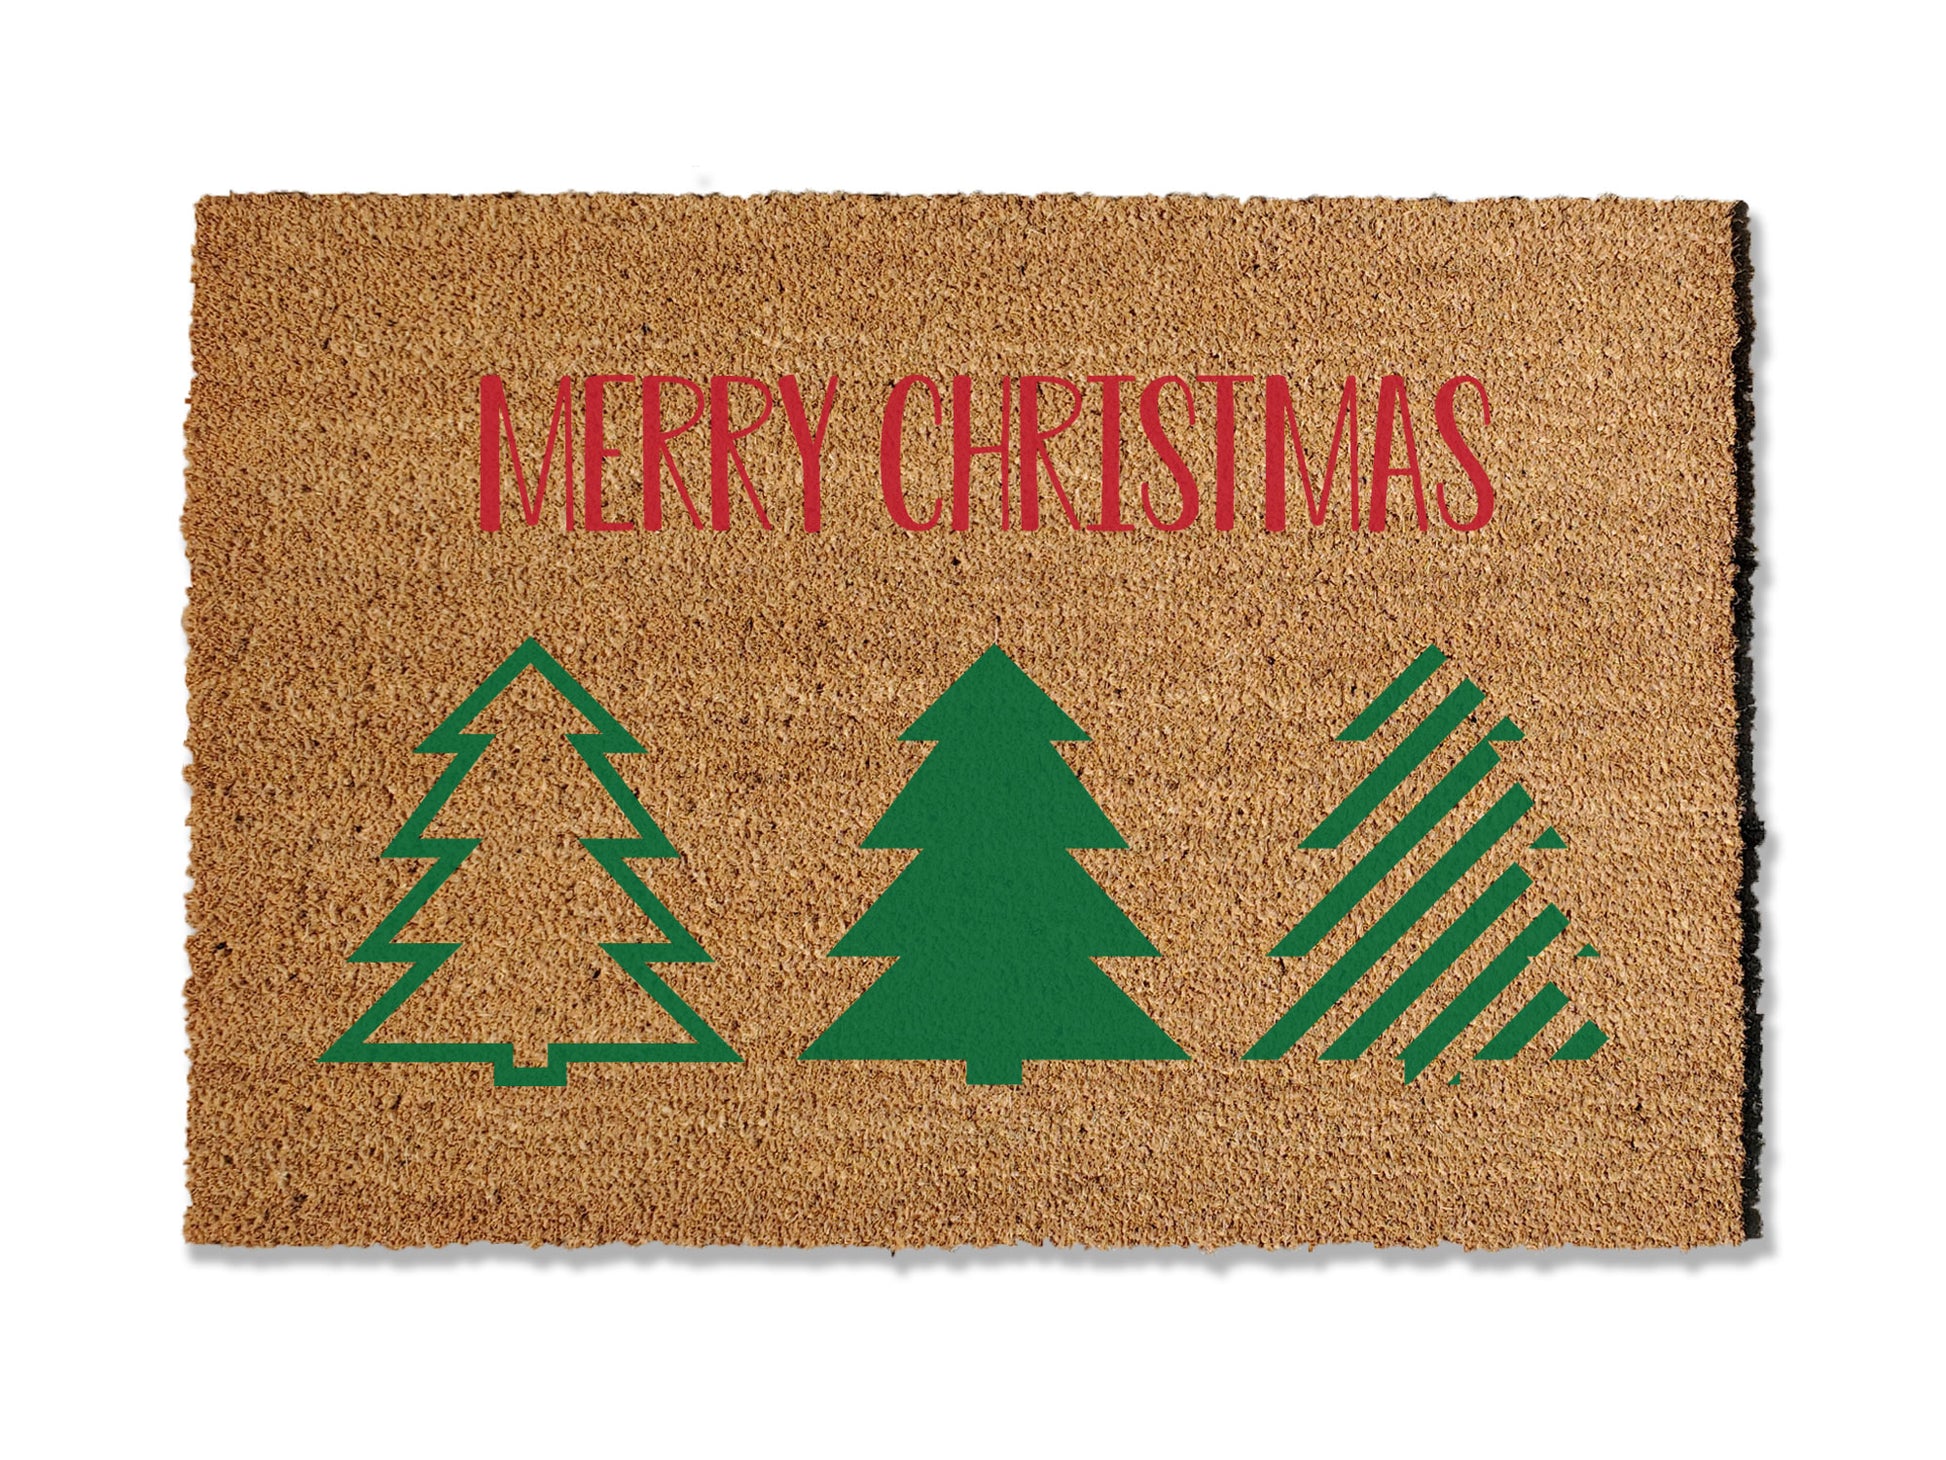 Embrace the holiday spirit with our seasonal coir doormat featuring Christmas trees and the greeting 'Merry Christmas.' Perfect for the festive season, this mat adds a touch of holiday cheer to your doorstep. Available in multiple sizes, it not only enhances your entryway with seasonal charm but also effectively traps dirt.